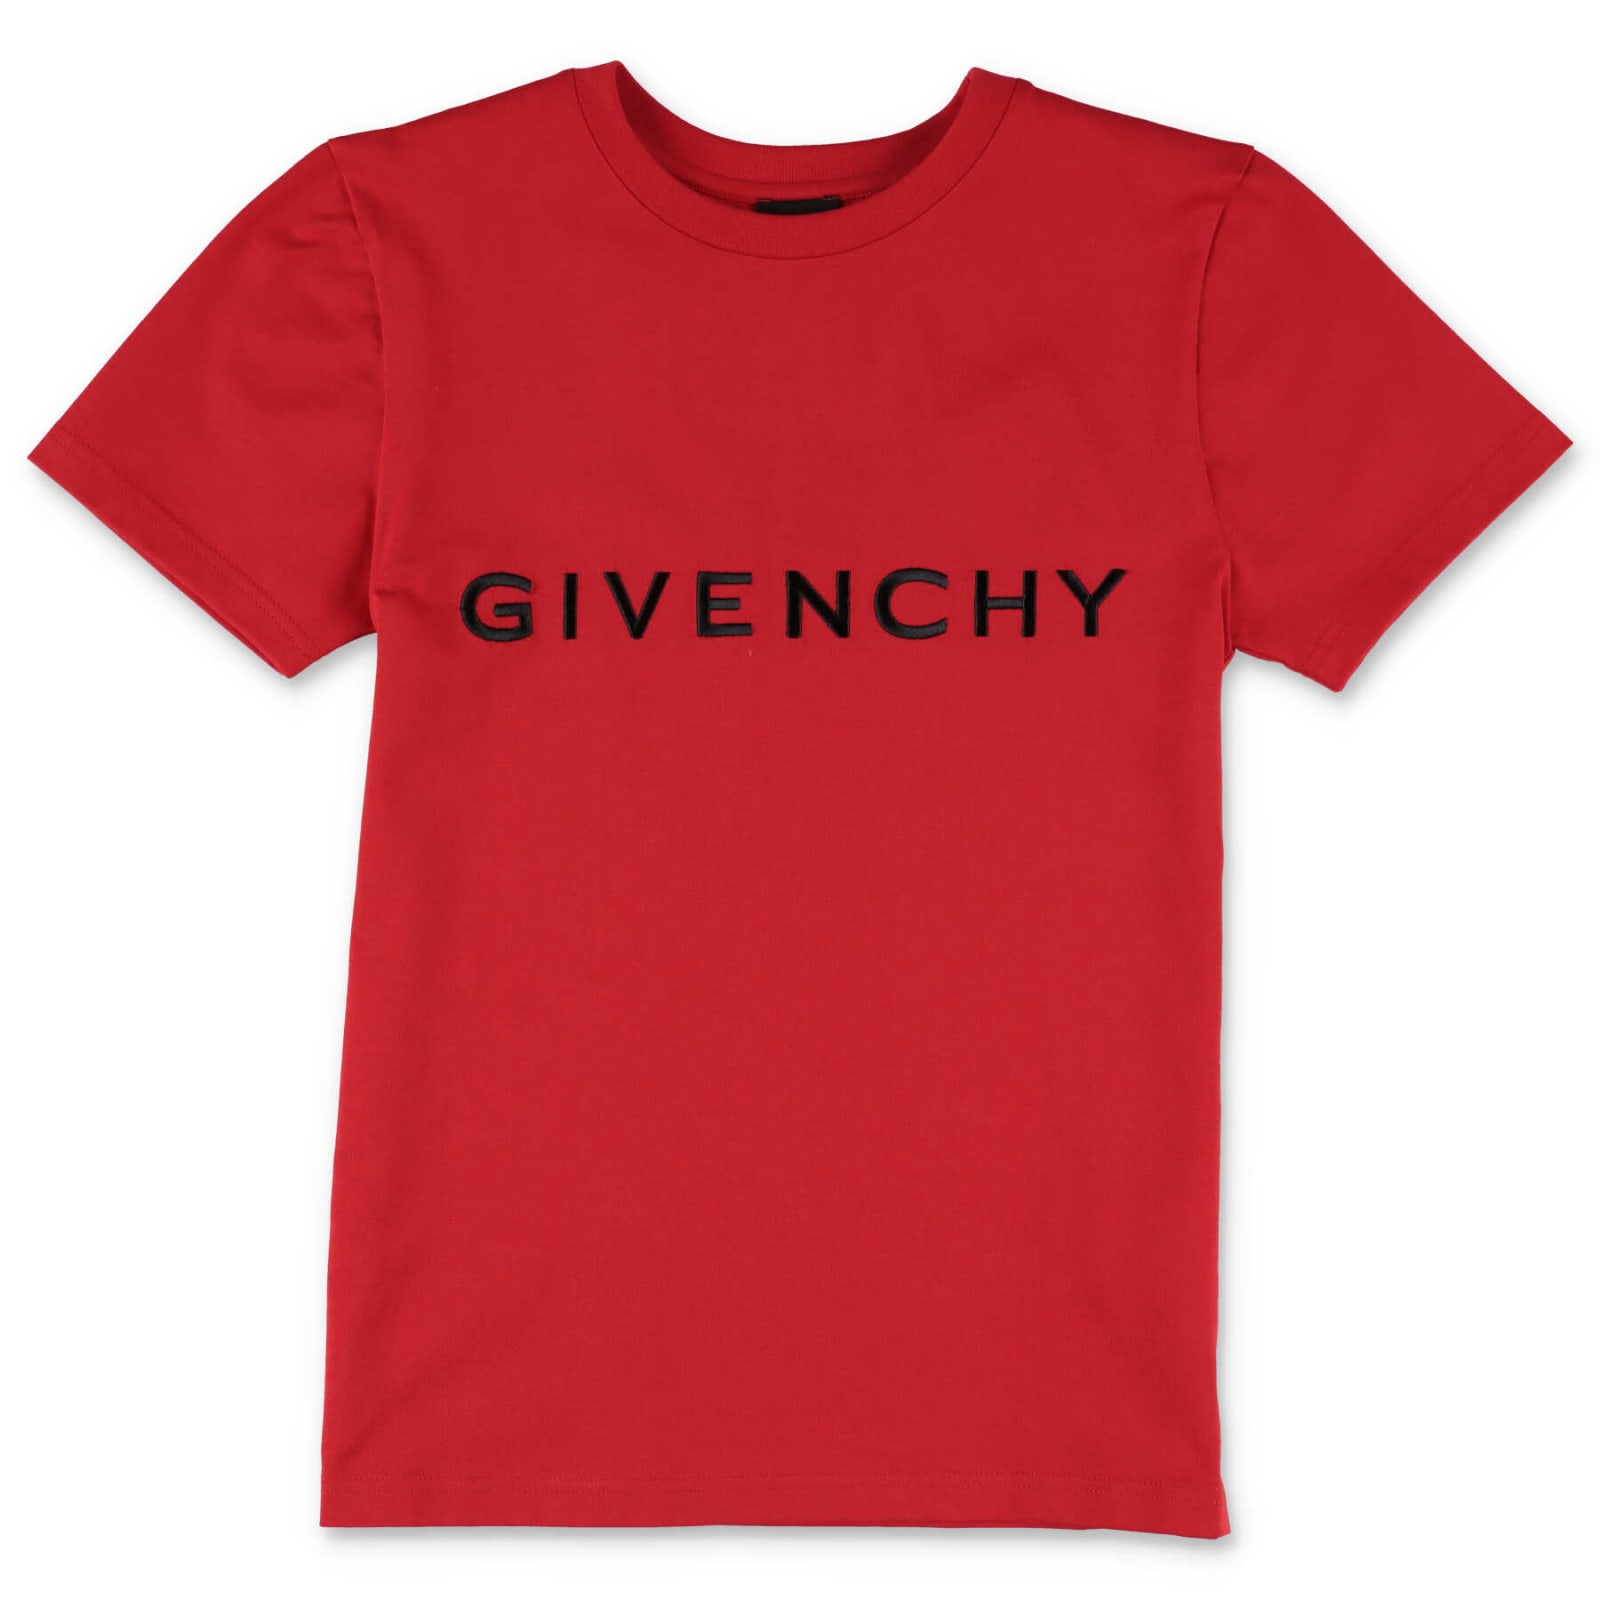 Givenchy T-shirt Rossa In Jersey Di Cotone